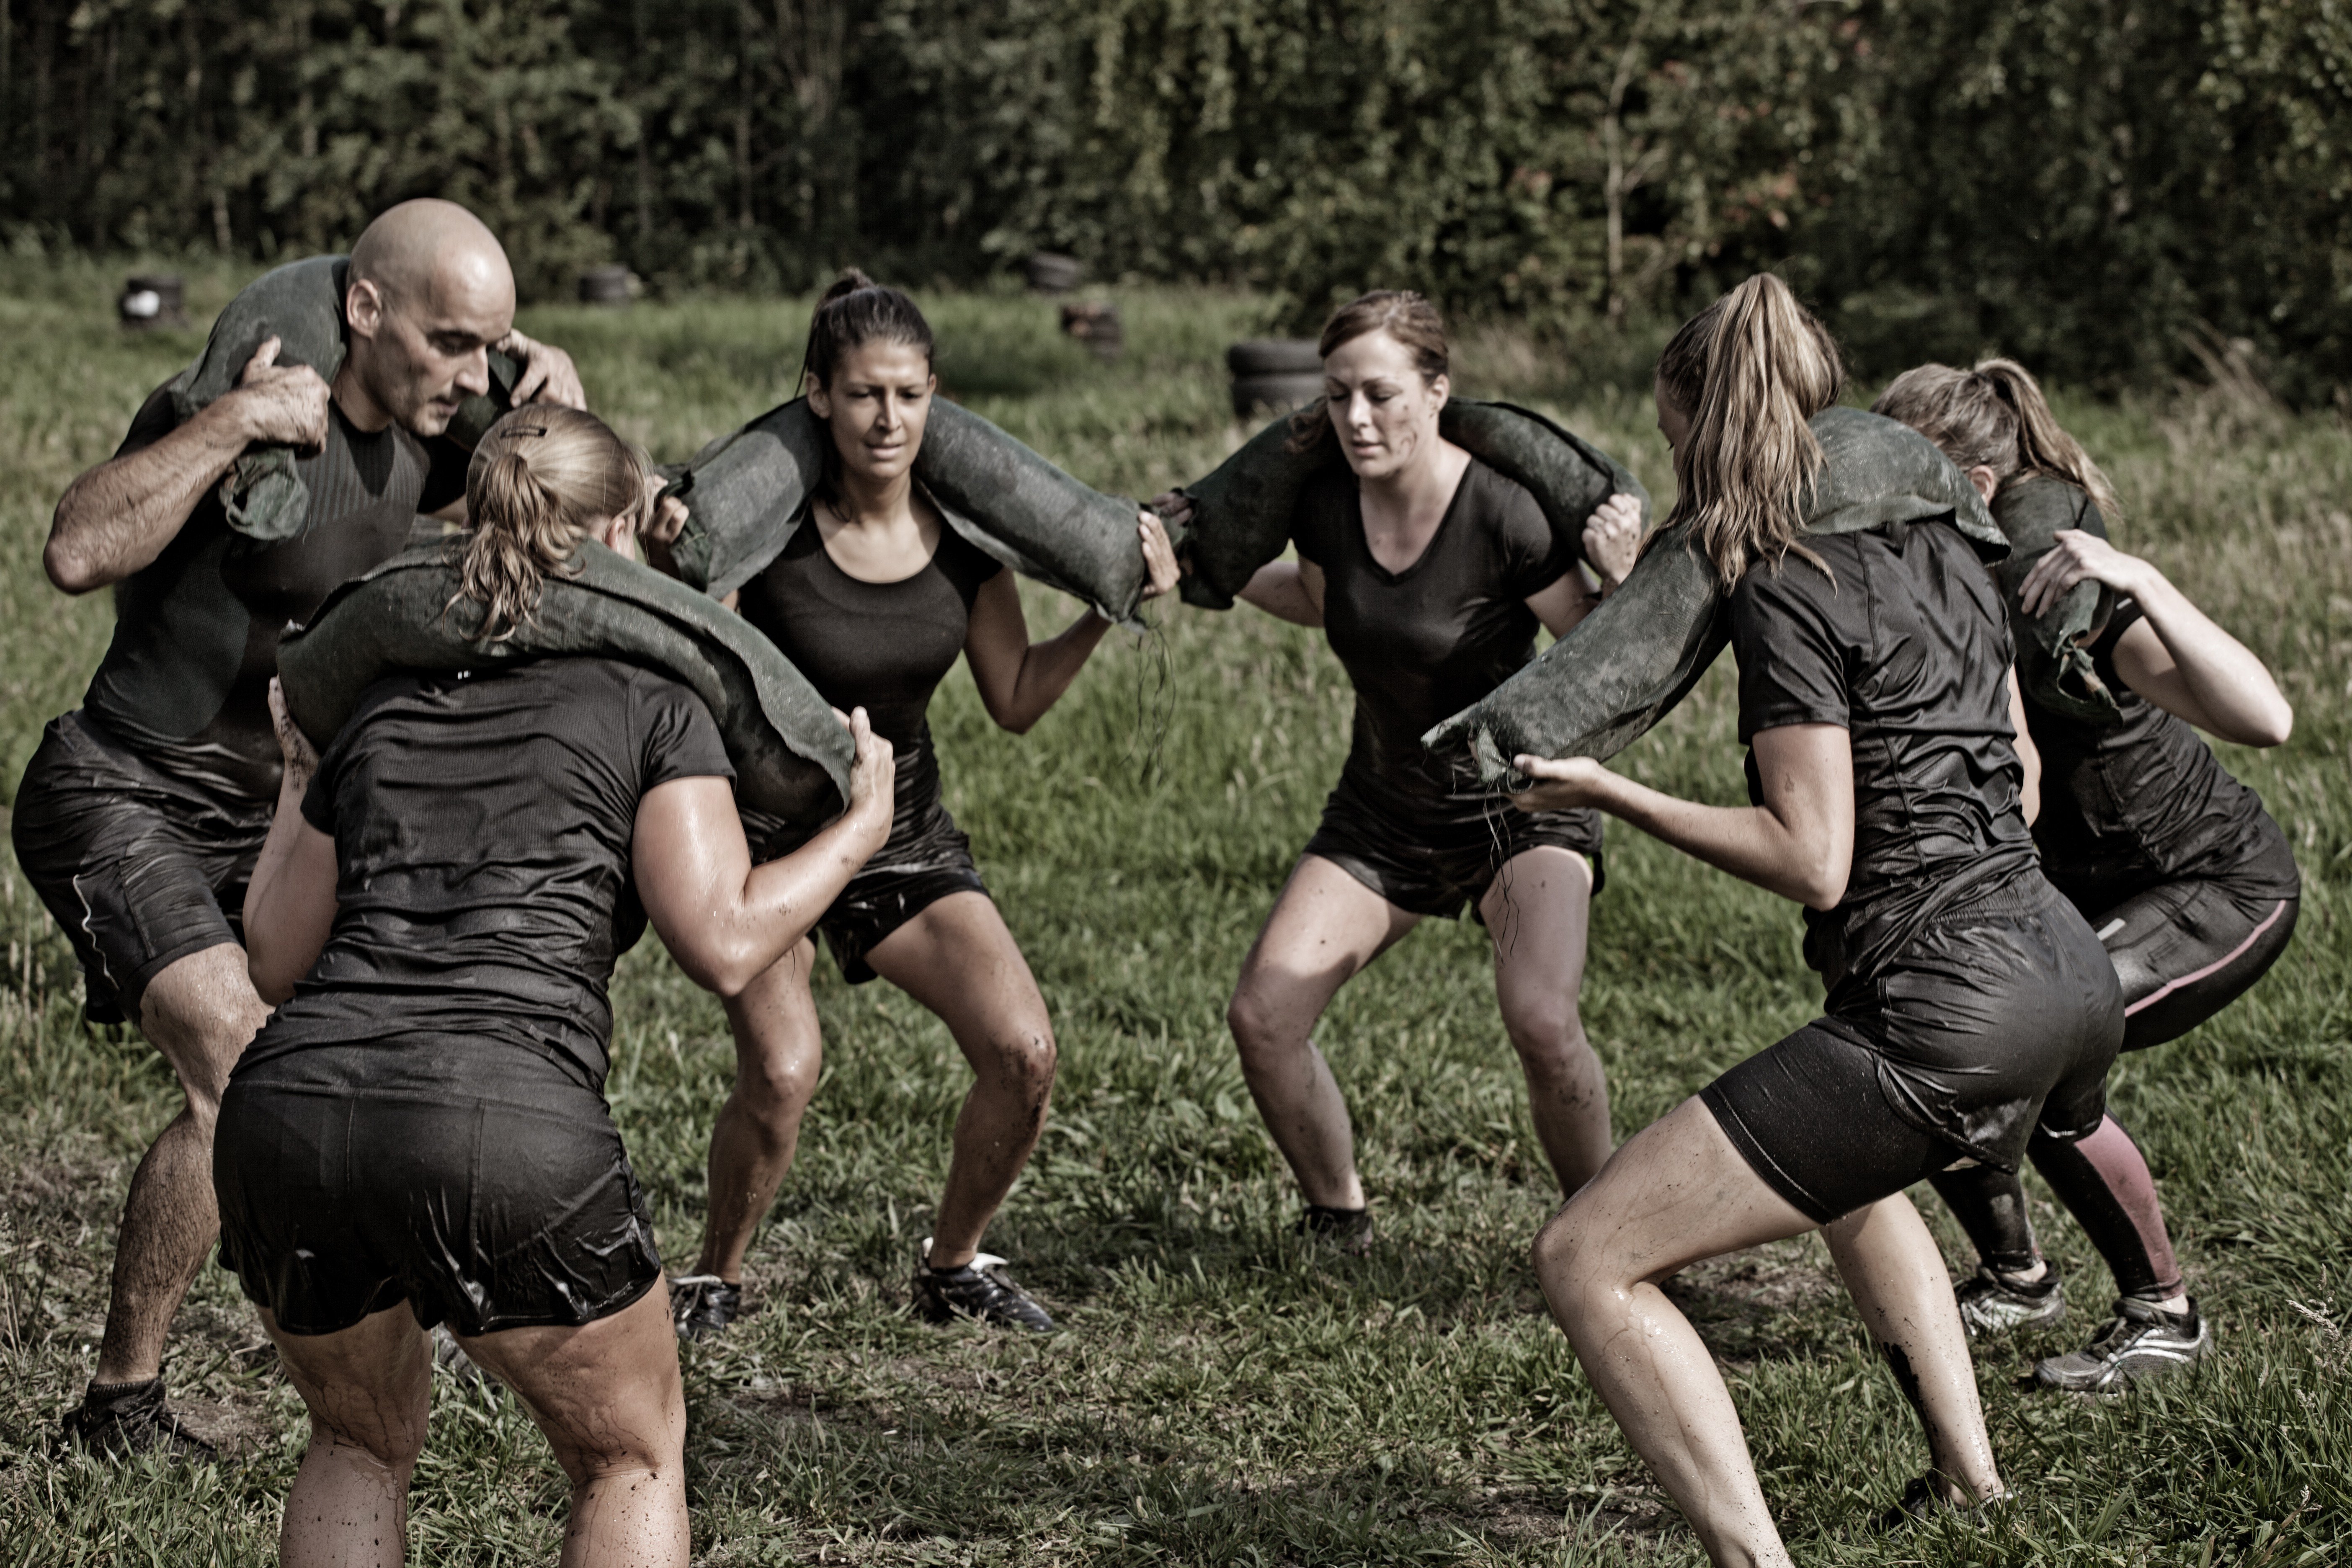 Military-style wellness boot camp inquiries and bookings have shot up by 48 per cent, more than two-thirds of them from women aged 30 to 60. Apart from rocketing obesity rates, many people find it tricky to juggle the work-life balance and opt for a quick reboot where they can get into good habits. Photo: Getty Images